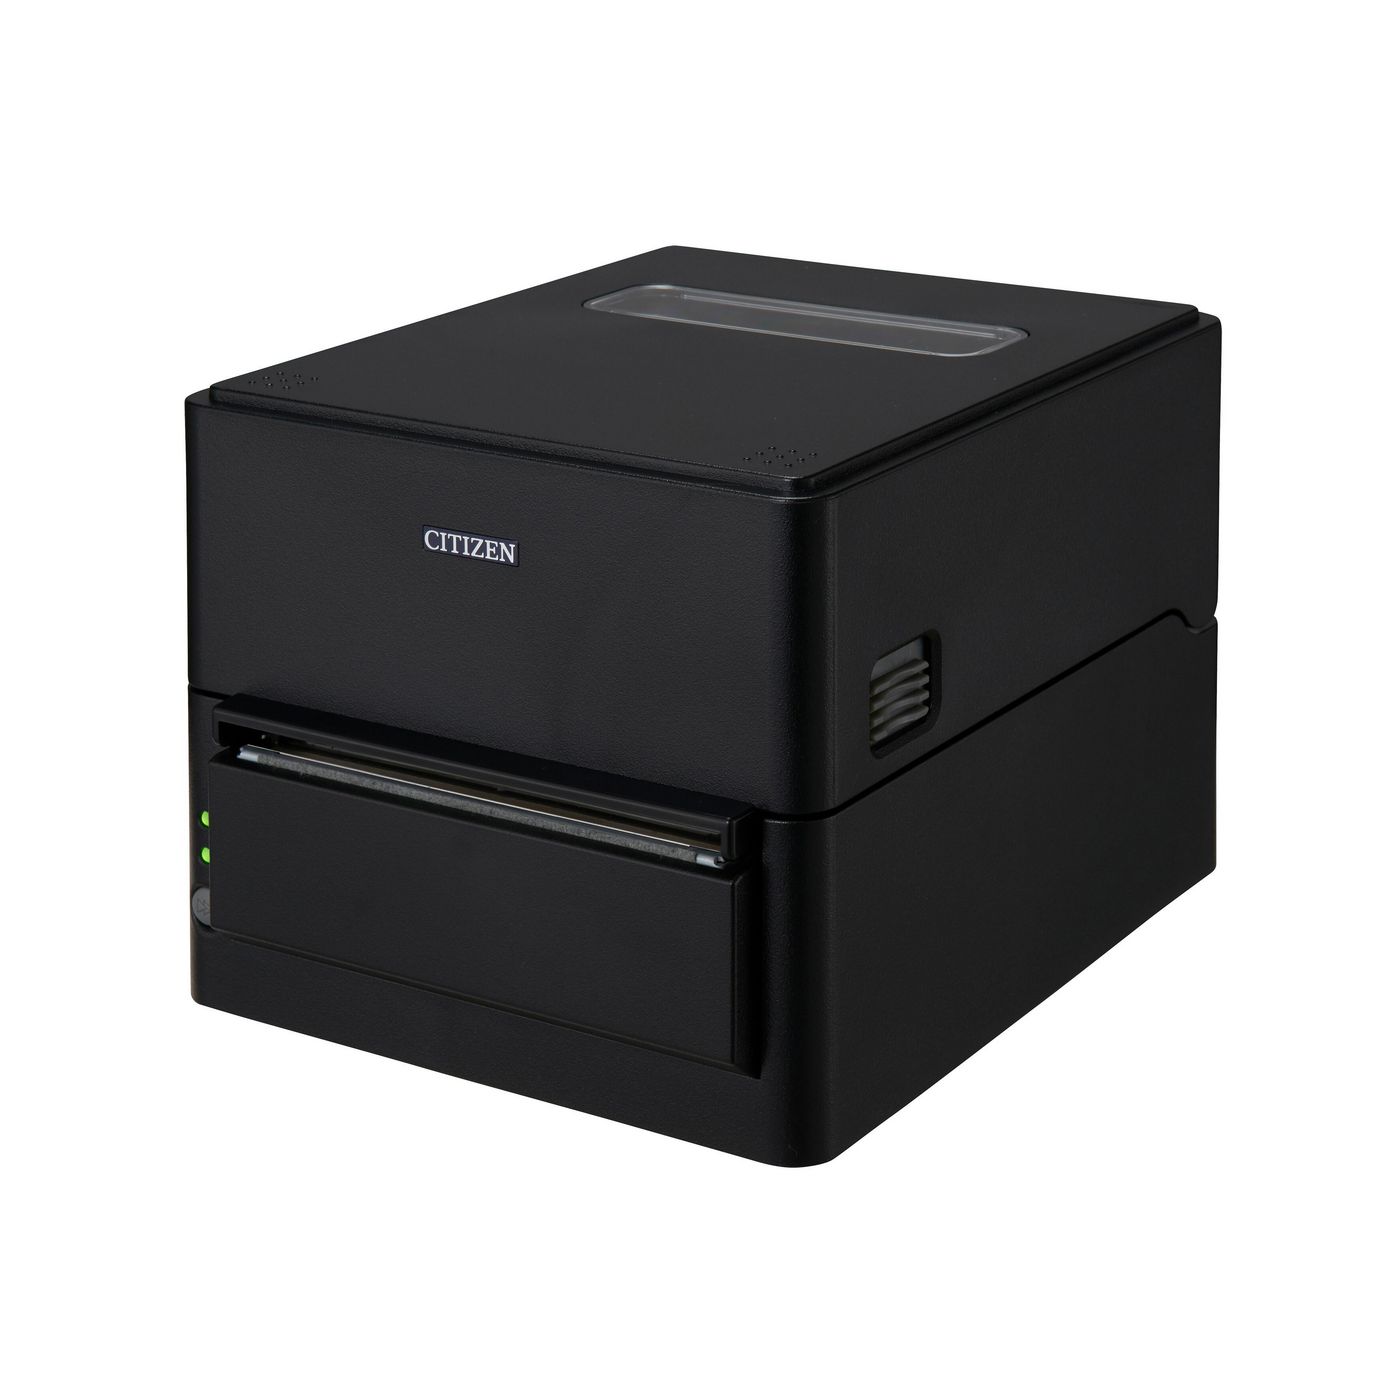 Ct-s4500 White - Receipt Printer - Direct Thermal - 104mm - USB And Bluetooth With Media Cutter (cts4500xnebx)